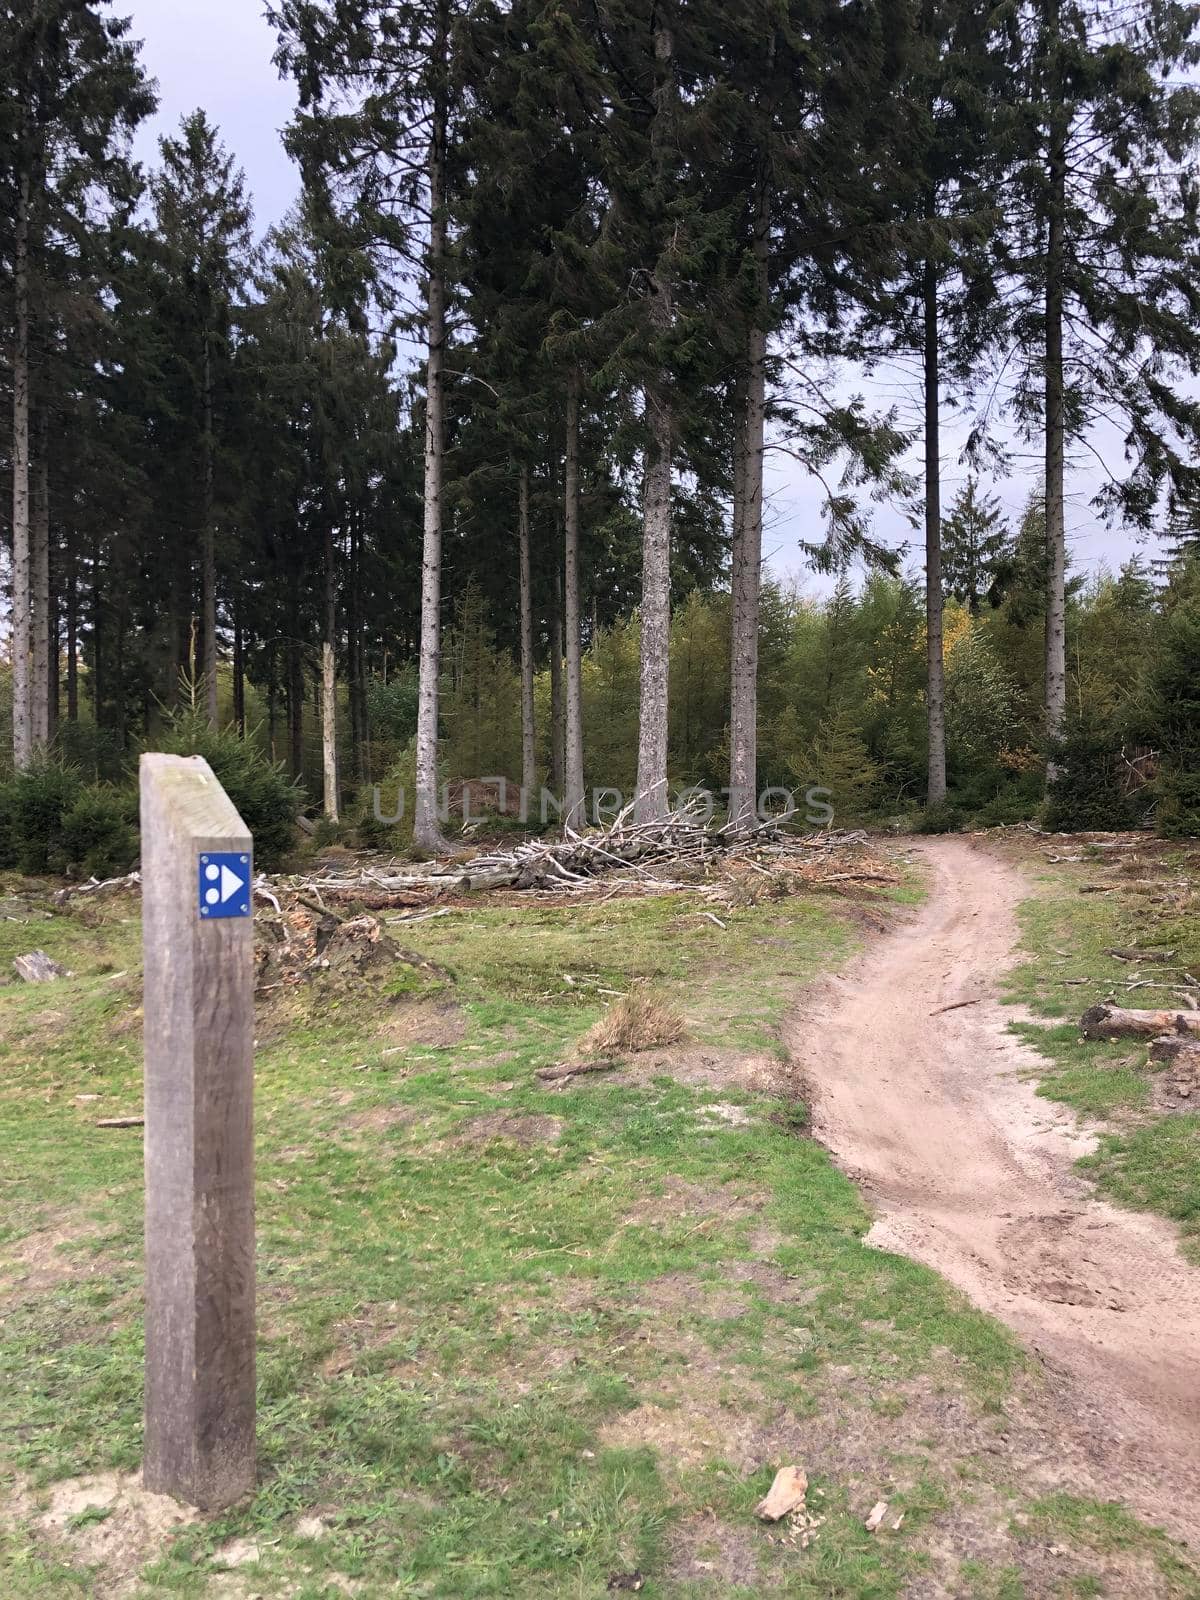 MTB sign at Nationaal Park Drents-Friese Wold in Friesland, The Netherlands